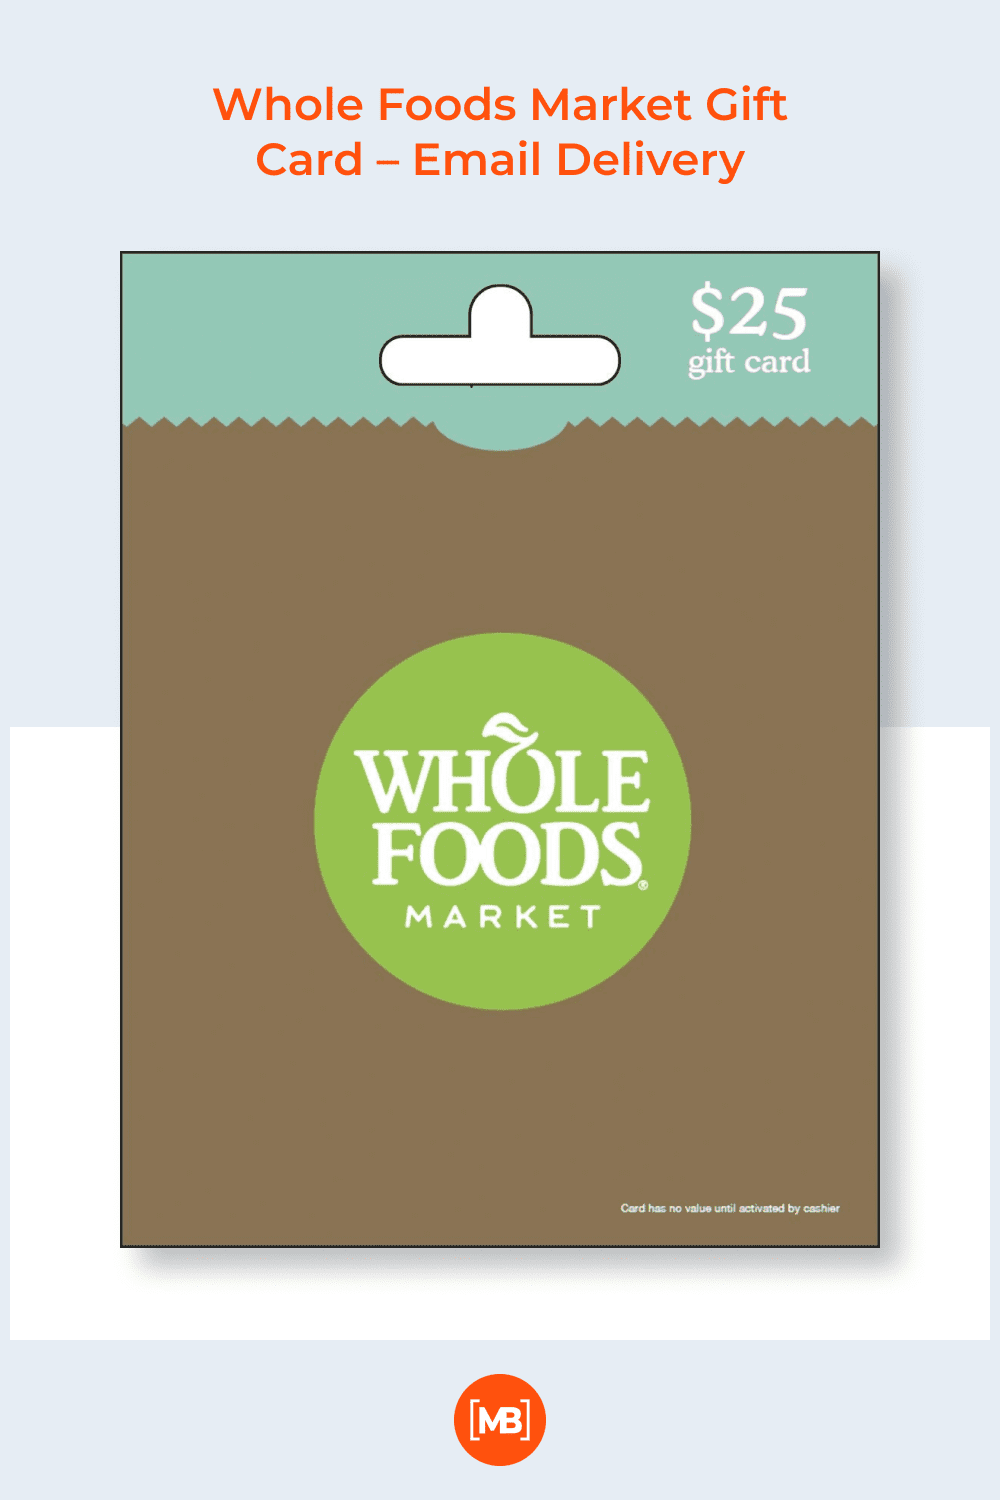 Whole foods market gift card.